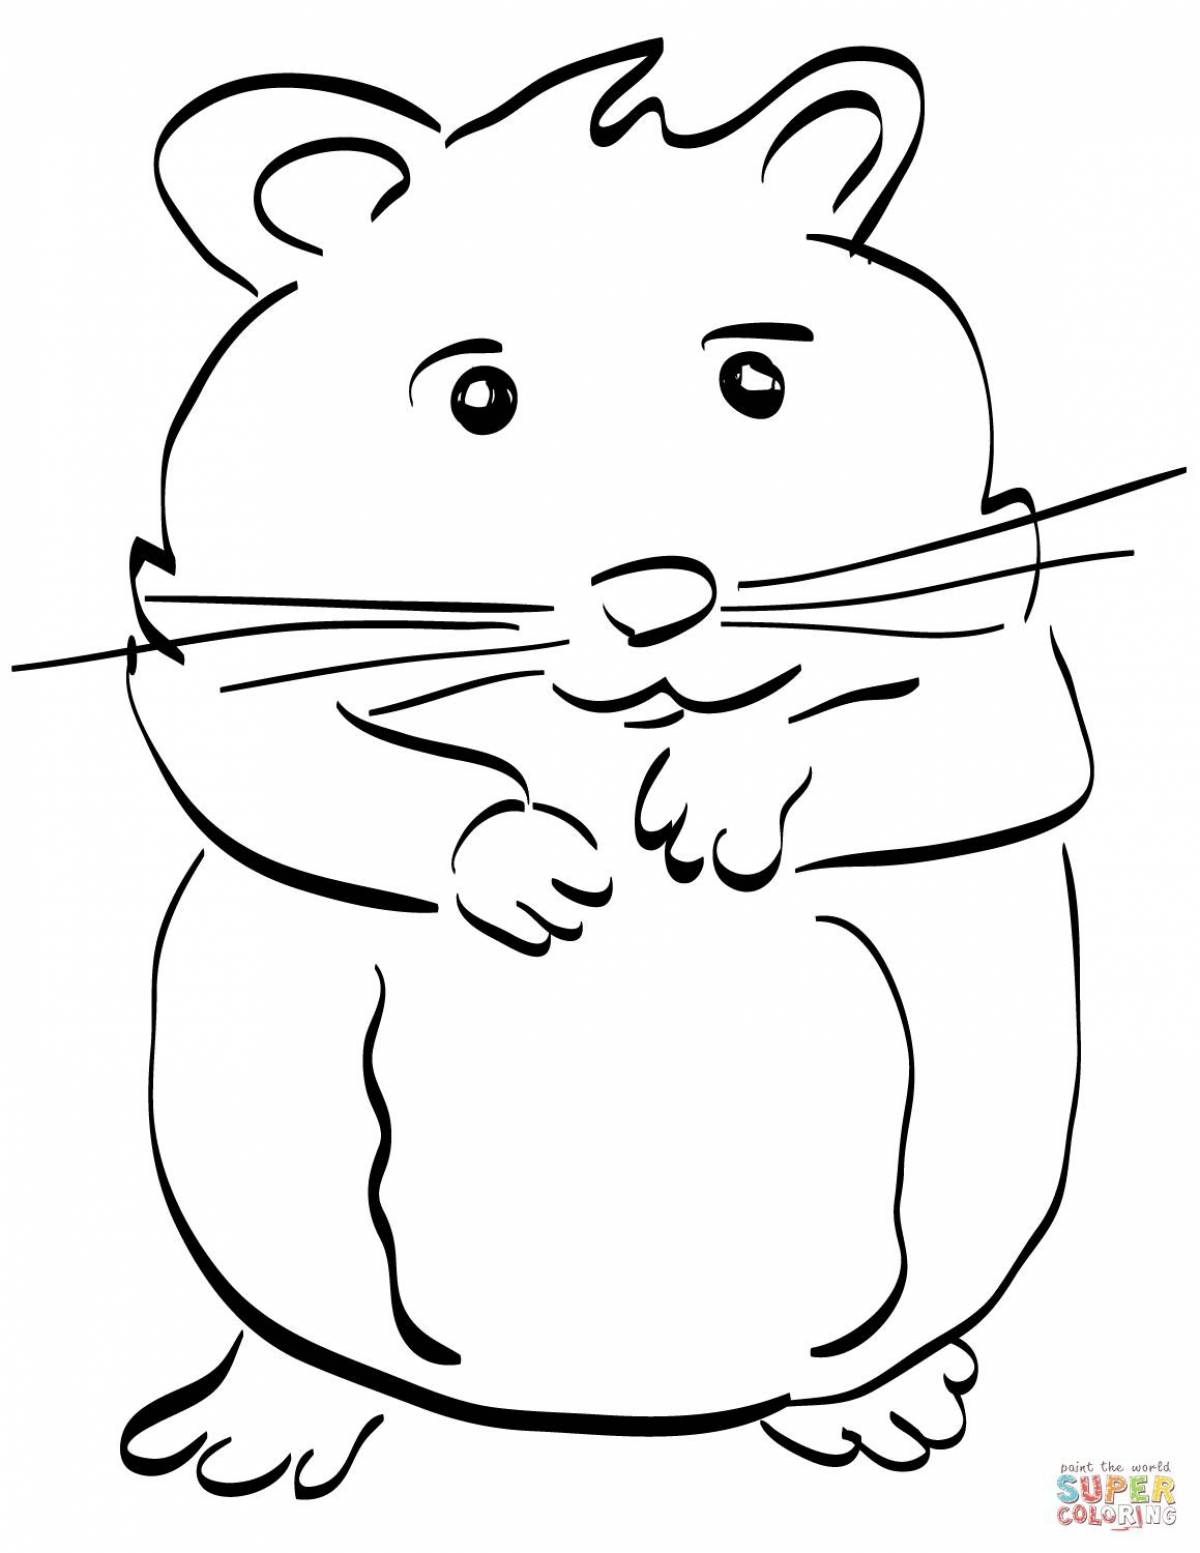 Exquisite hamster coloring book for kids